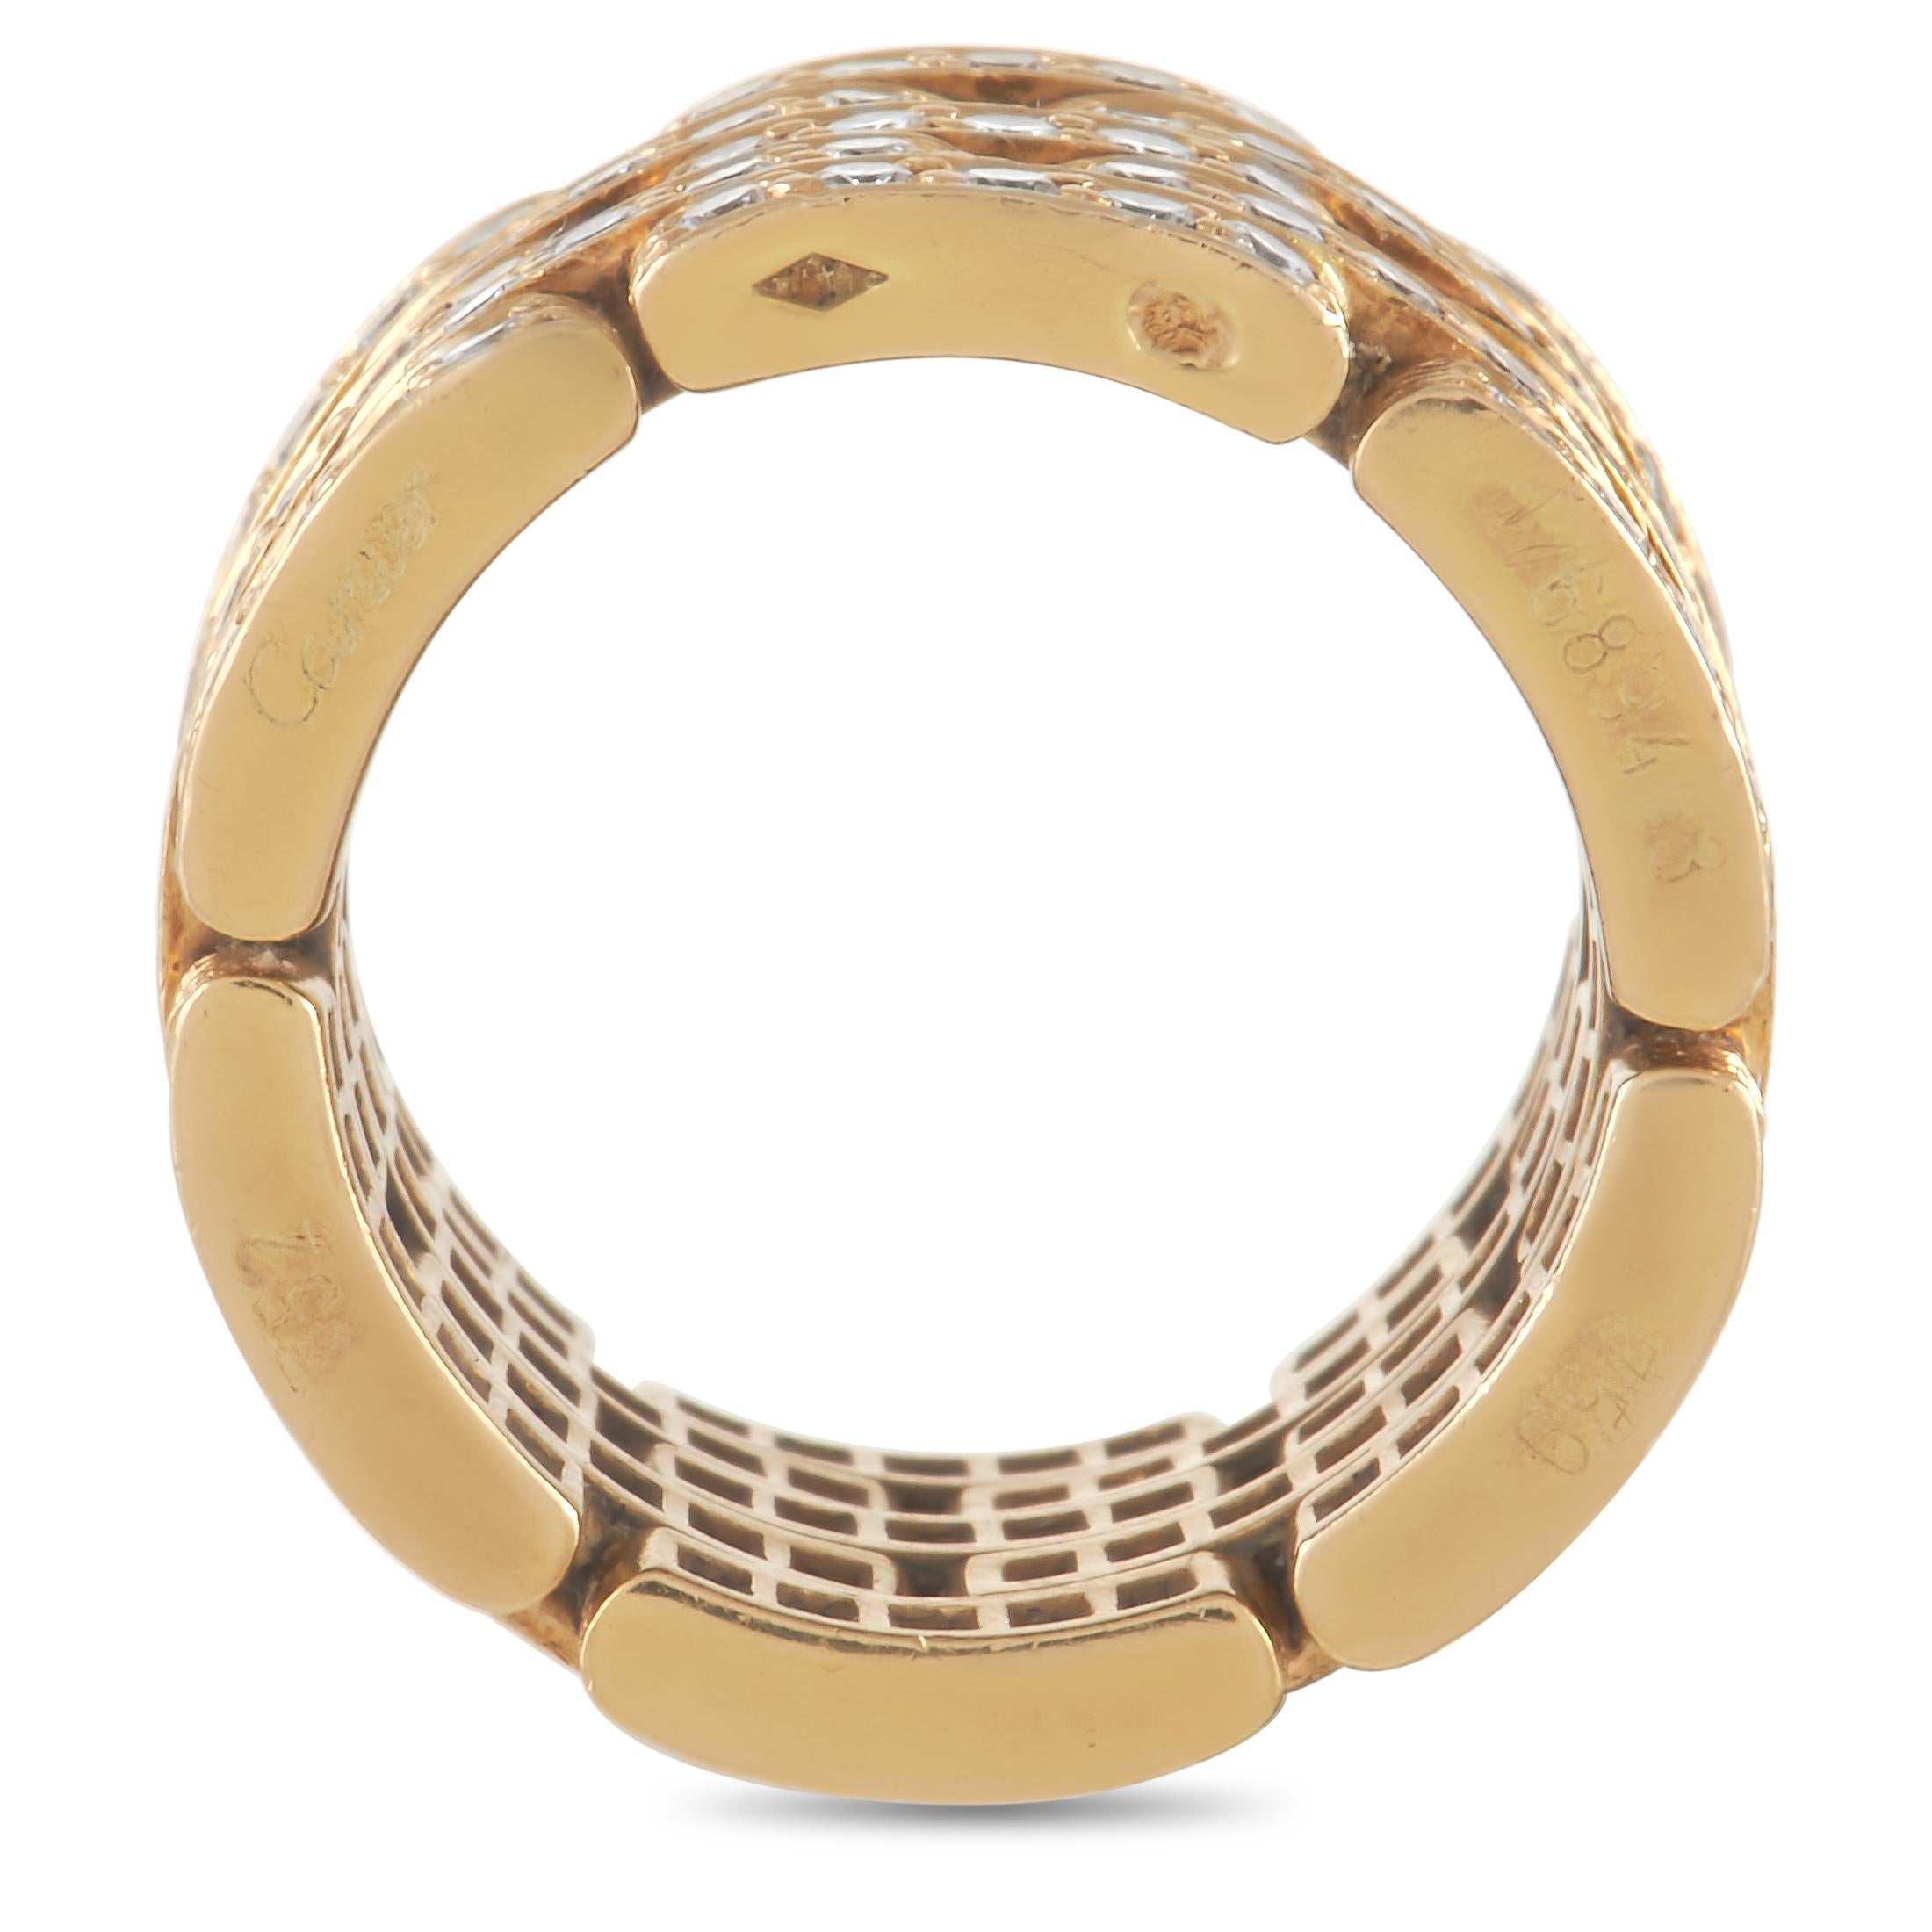 This impeccably crafted Cartier Maillon de Panthère ring is a luxury piece that will elevate any jewelry collection. The dynamic 18K yellow gold setting only elevates the beauty of this piece’s shimmering diamonds, which feature E color, VVS